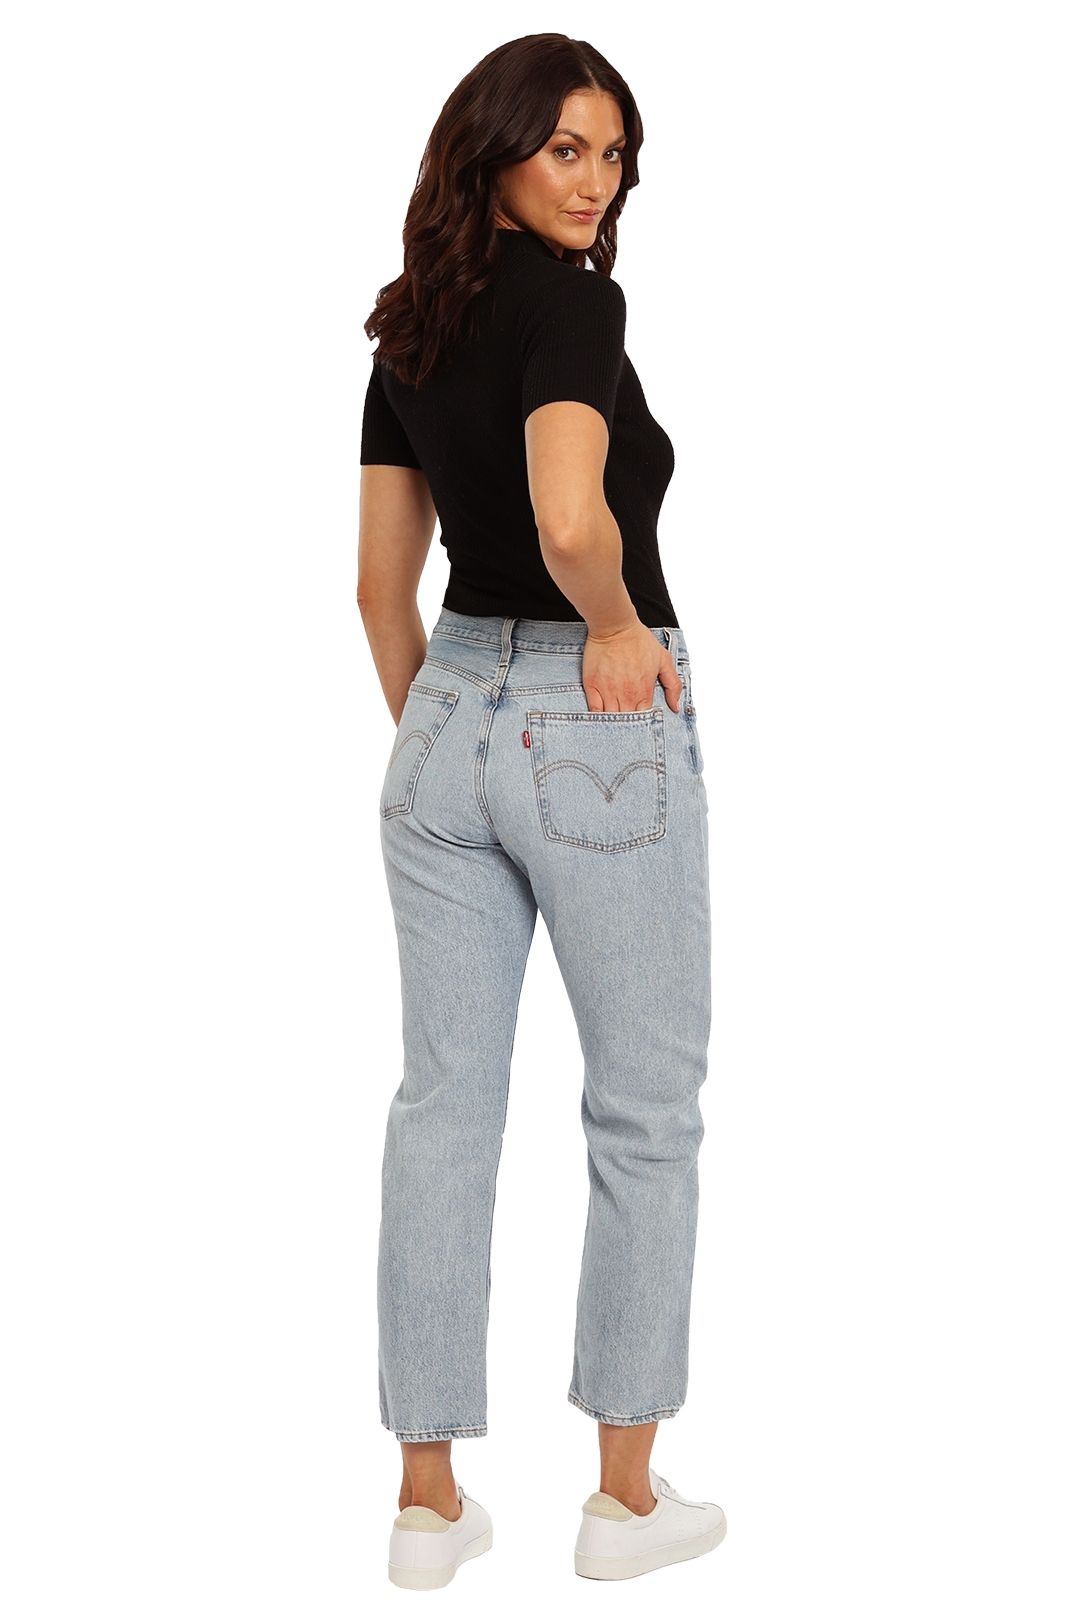 Levi's Wedgie Straight Jean Cropped